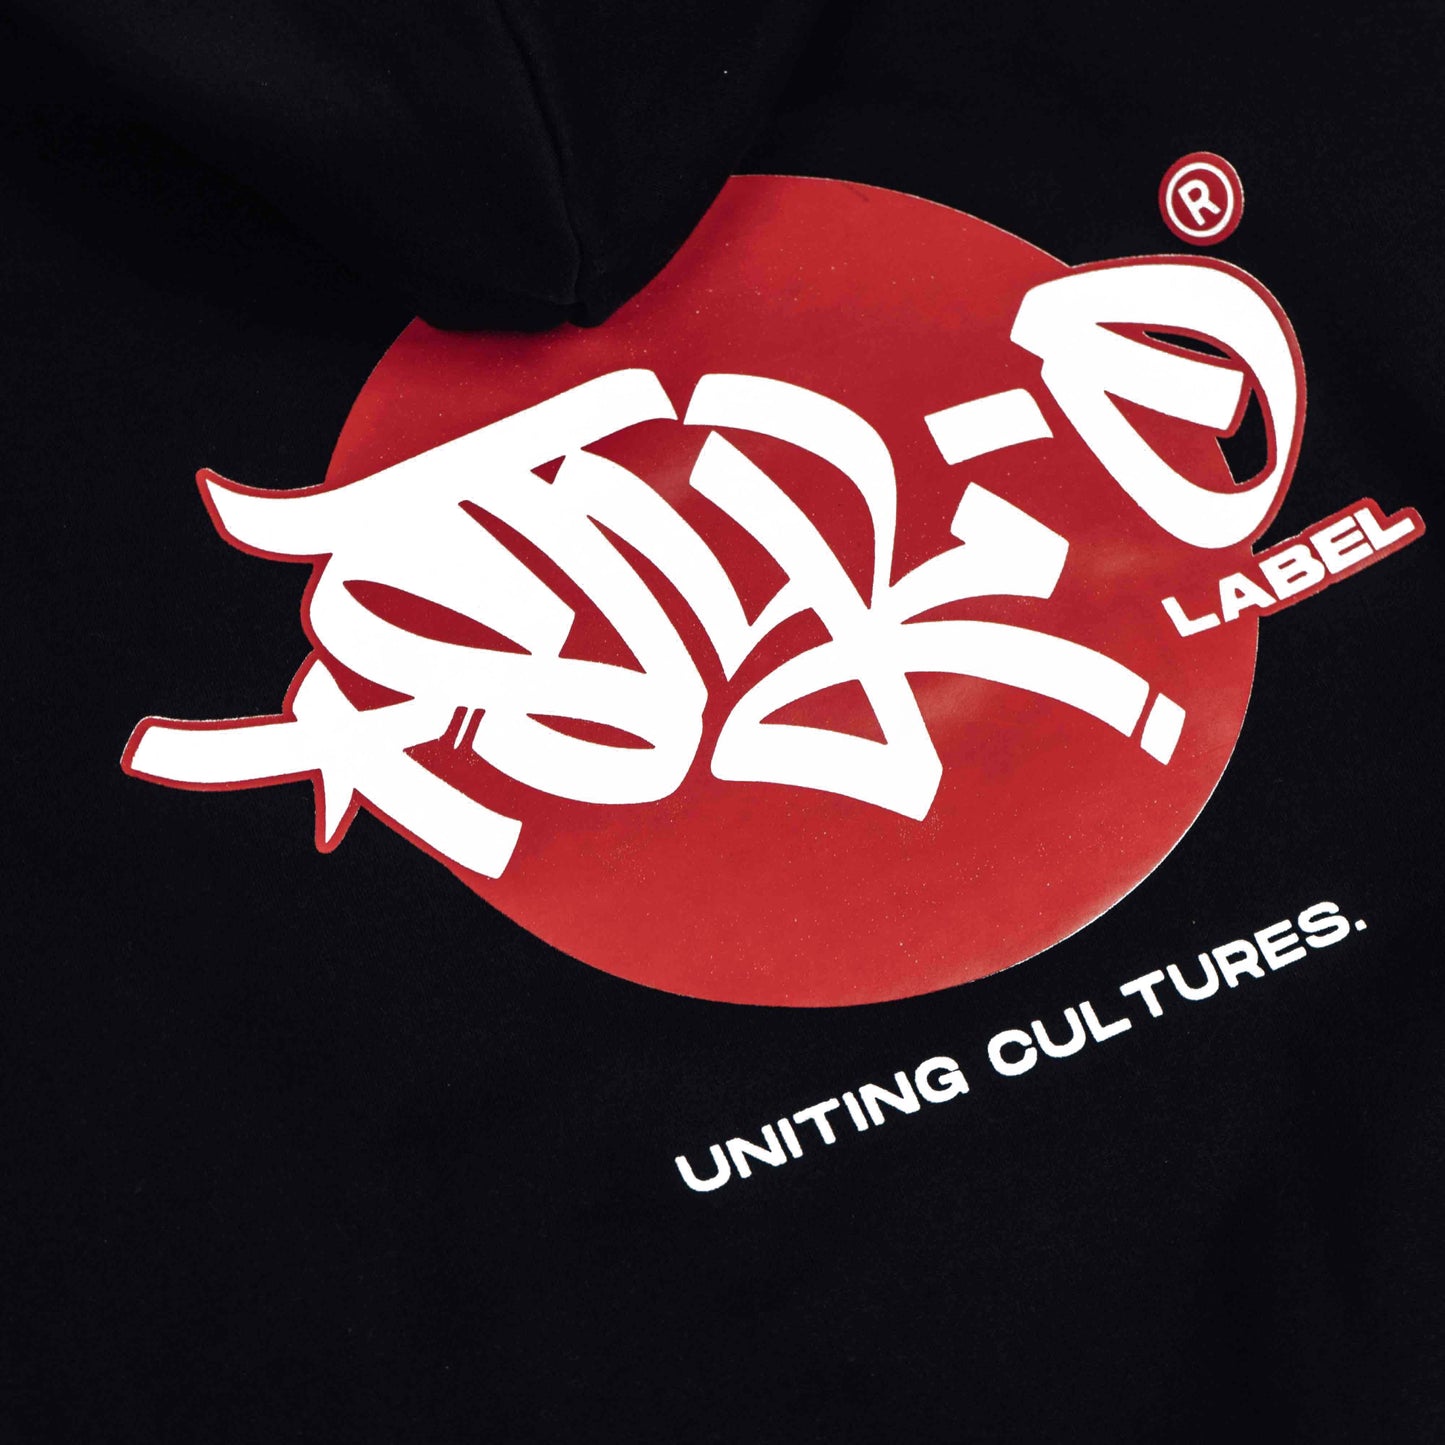 Uniting Cultures Hoodie